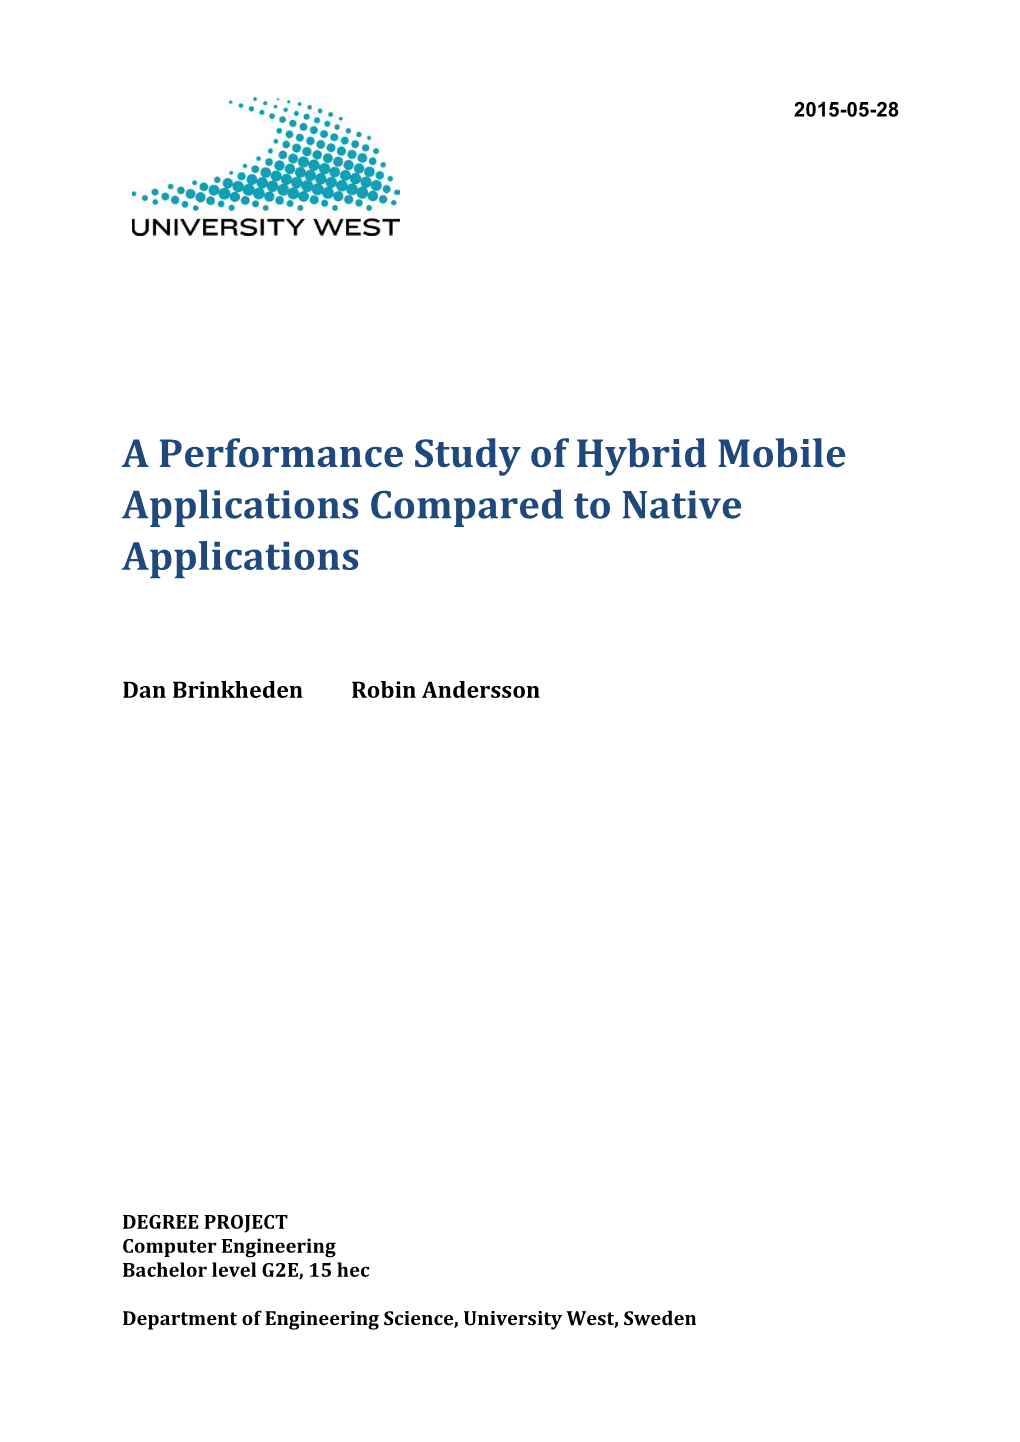 A Performance Study of Hybrid Mobile Applications Compared to Native Applications